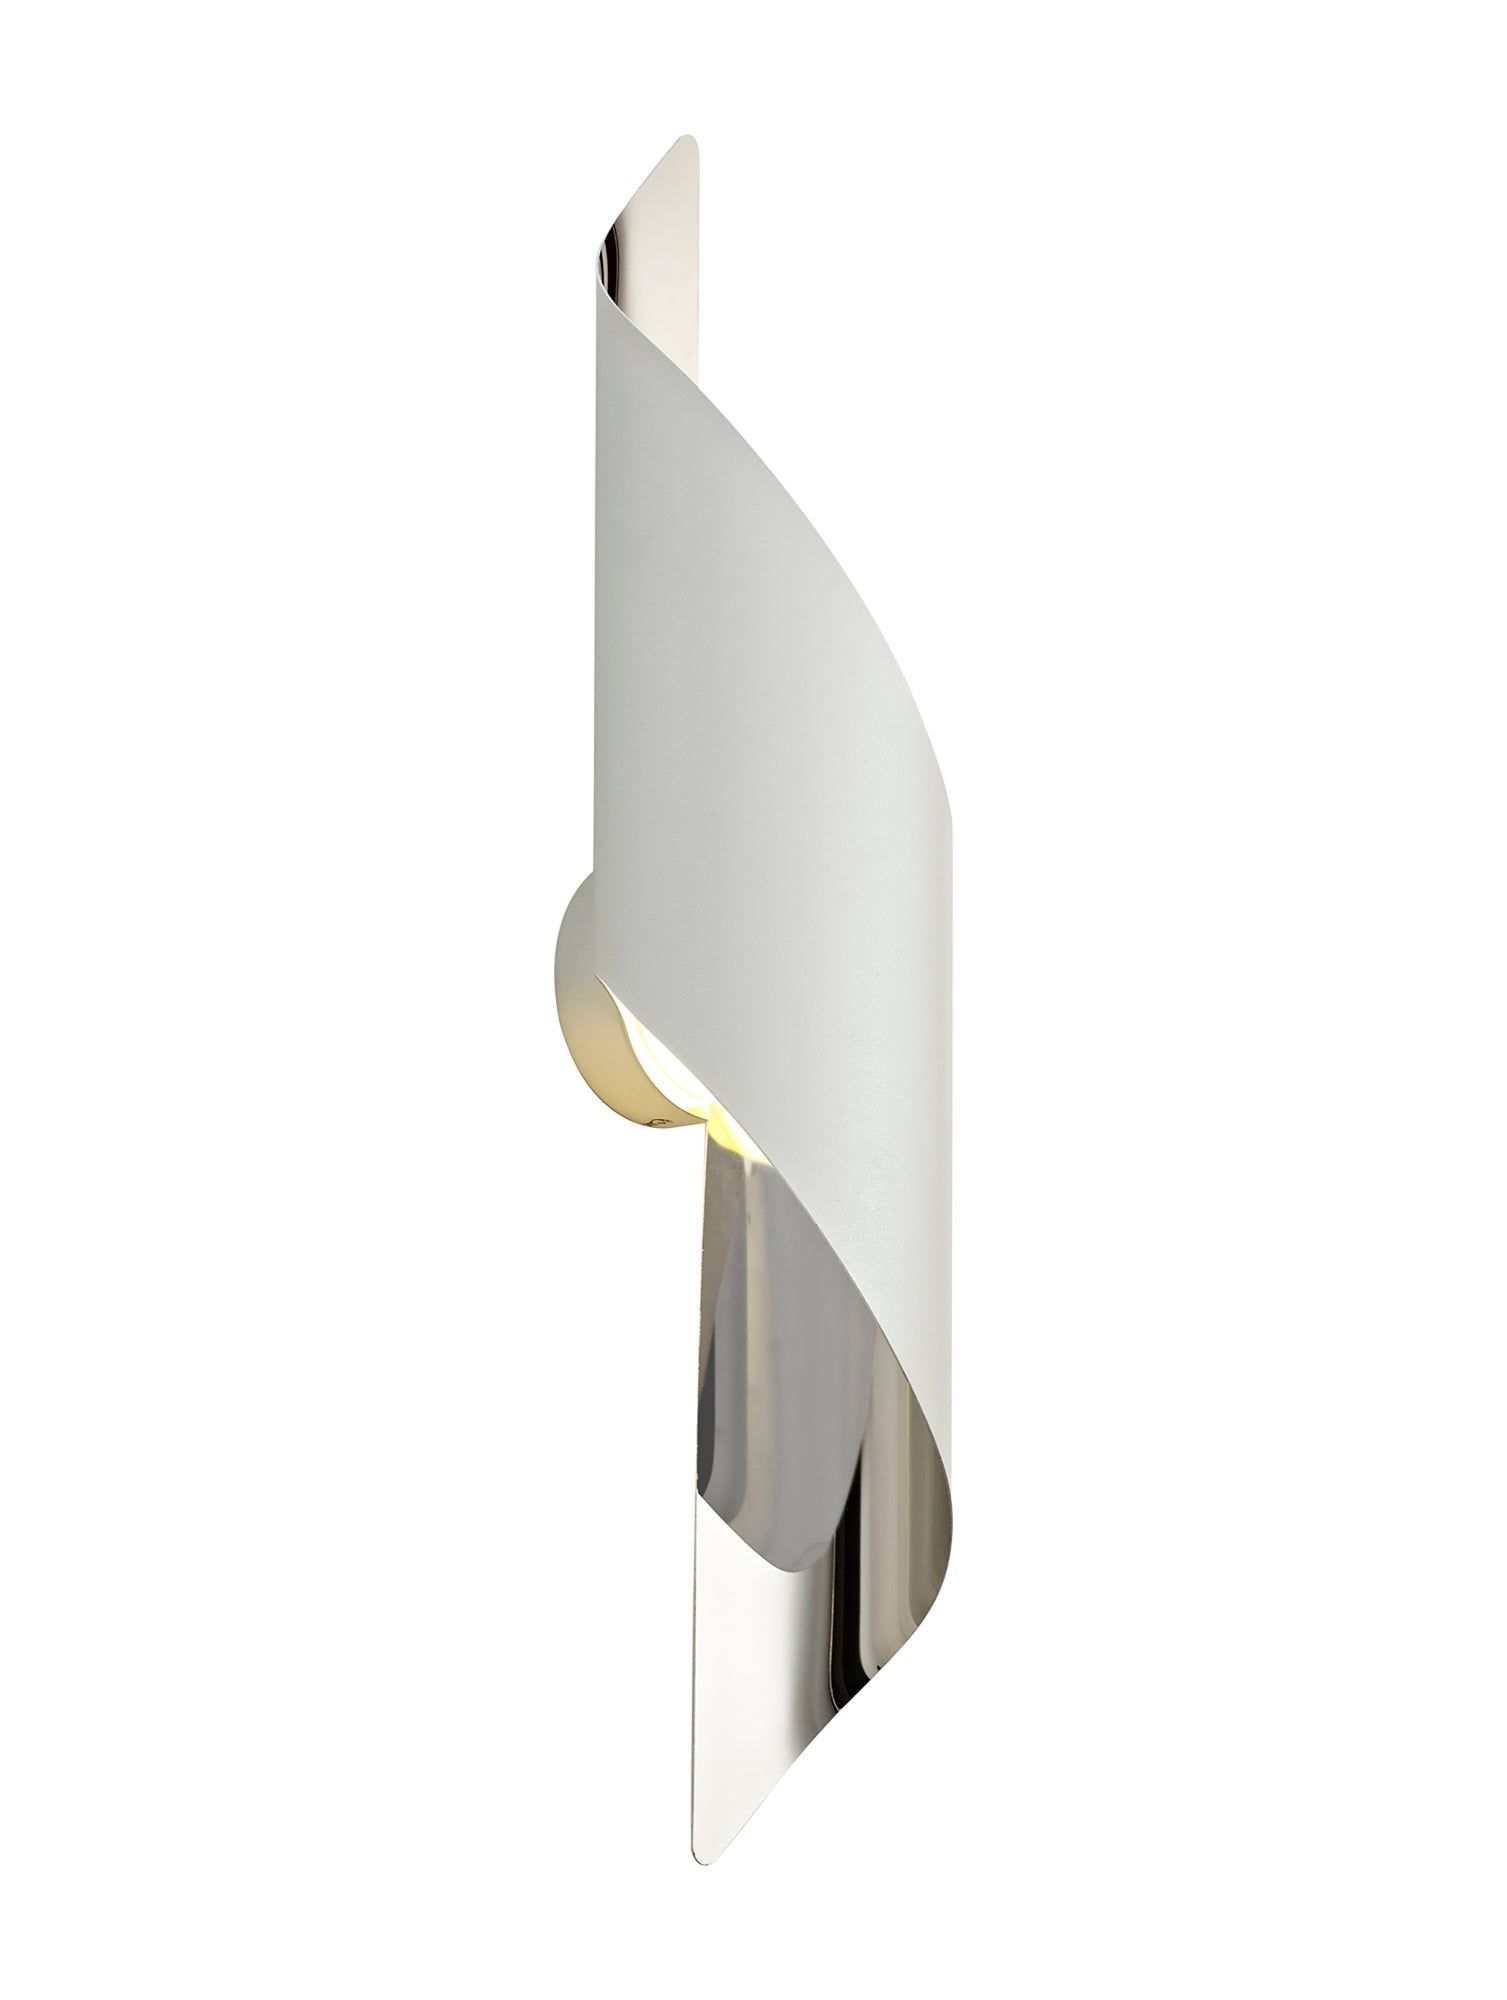 Cubby Wall Lamp Large, 1 x 8W LED, 3000K, 640lm, White/Polished Chrome, 3yrs Warranty